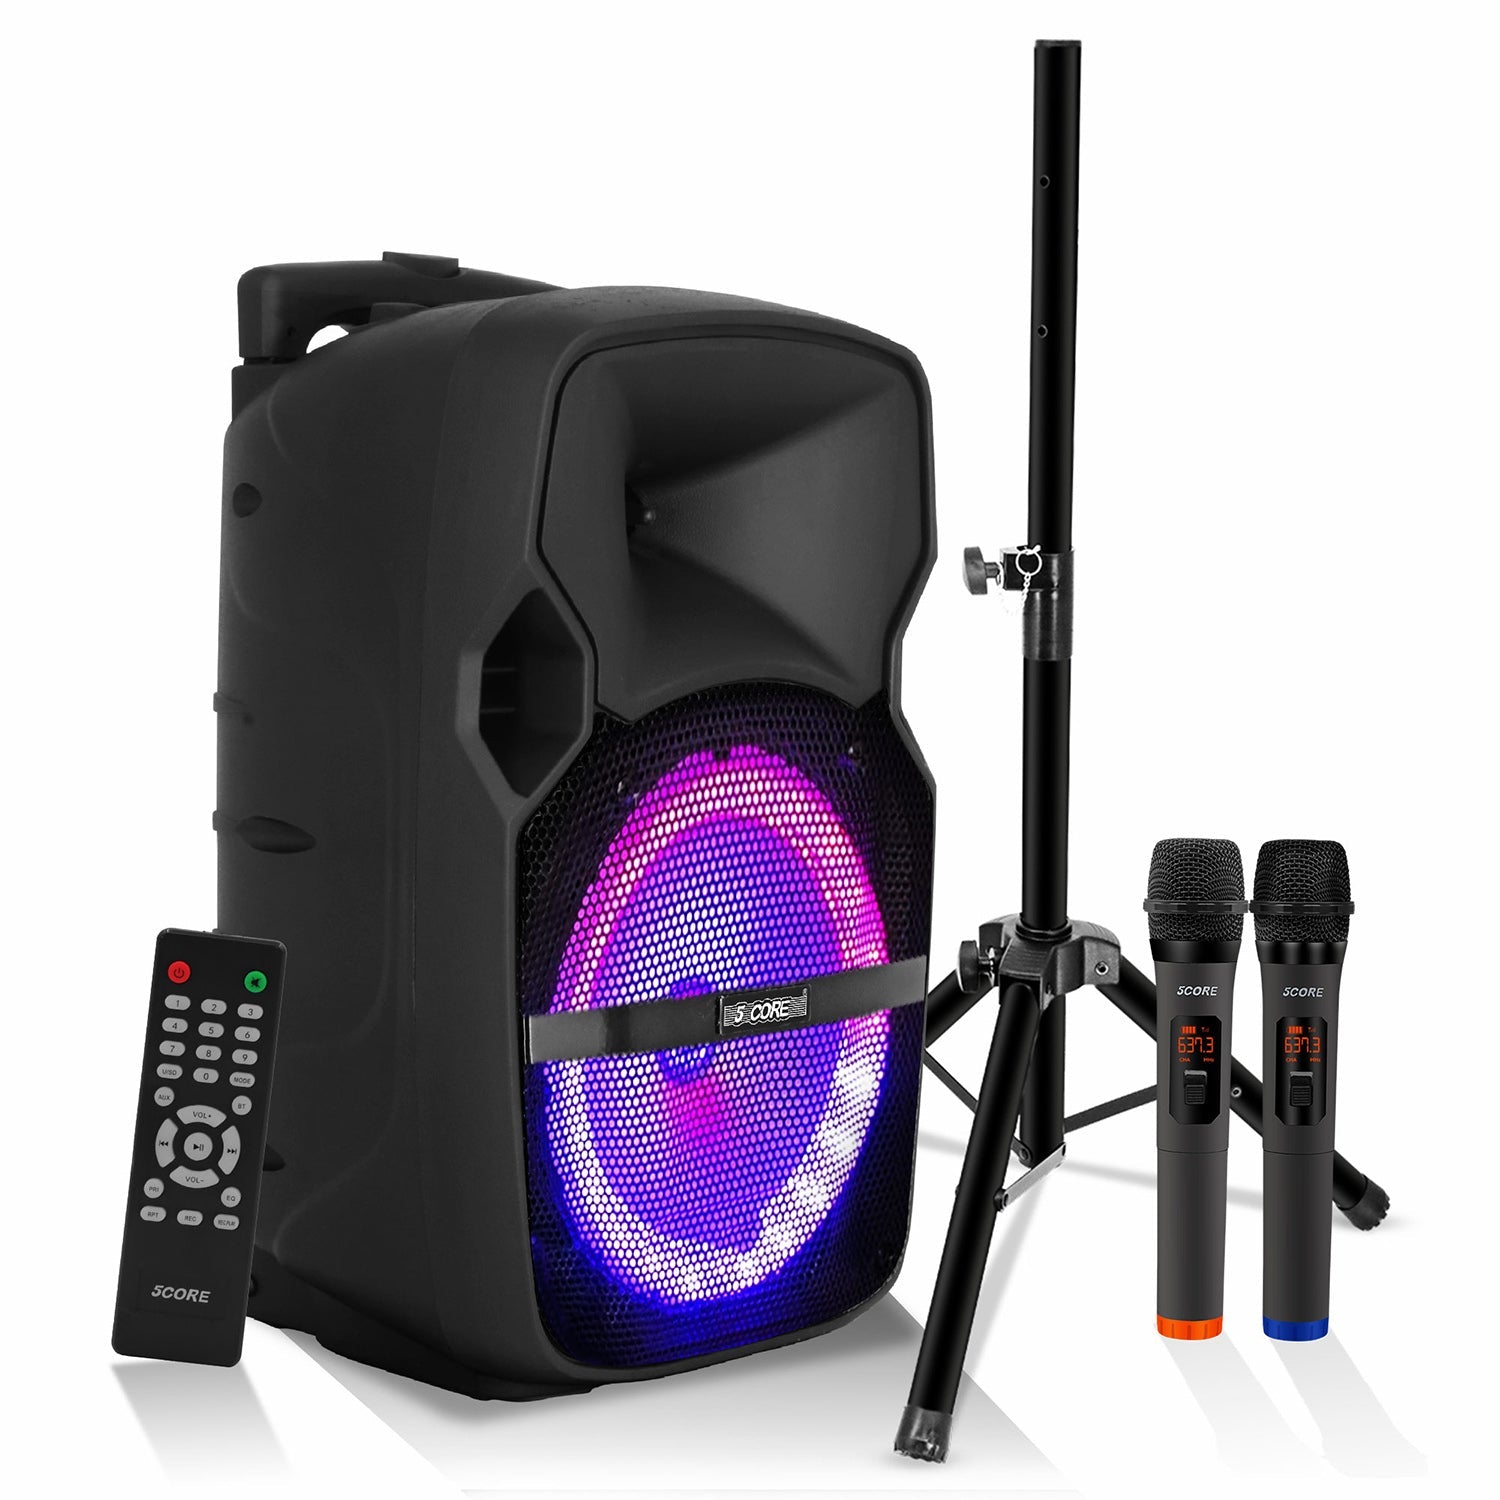 5Core 10 Inch Party Speaker Portable PA System with karaoke machine for adults.